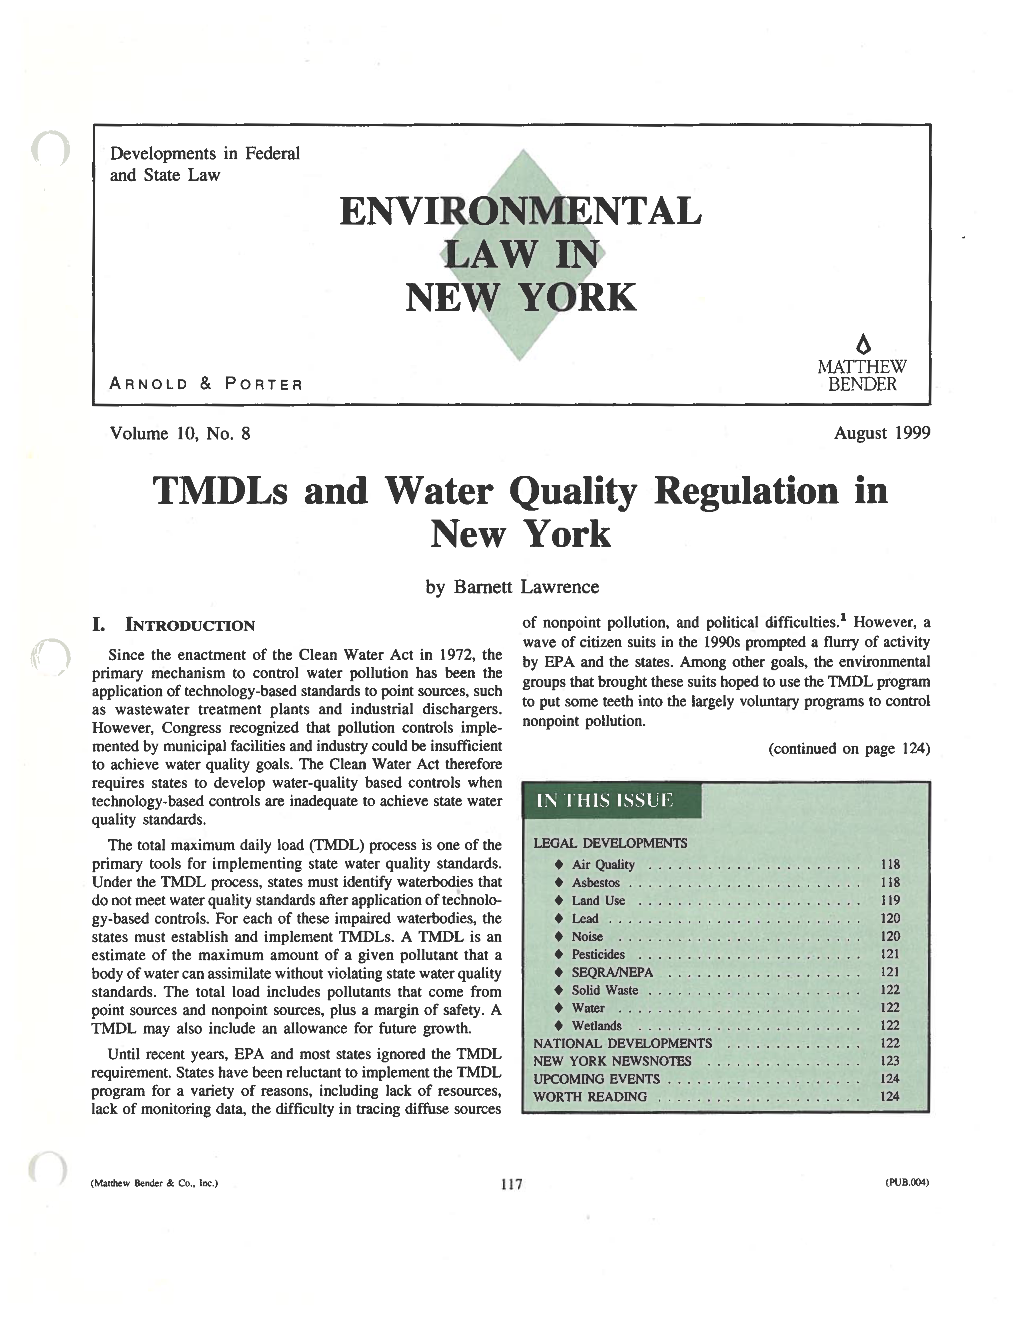 ENVIRONMENTAL LAW in NEW YORK Tmdls and Water Quality